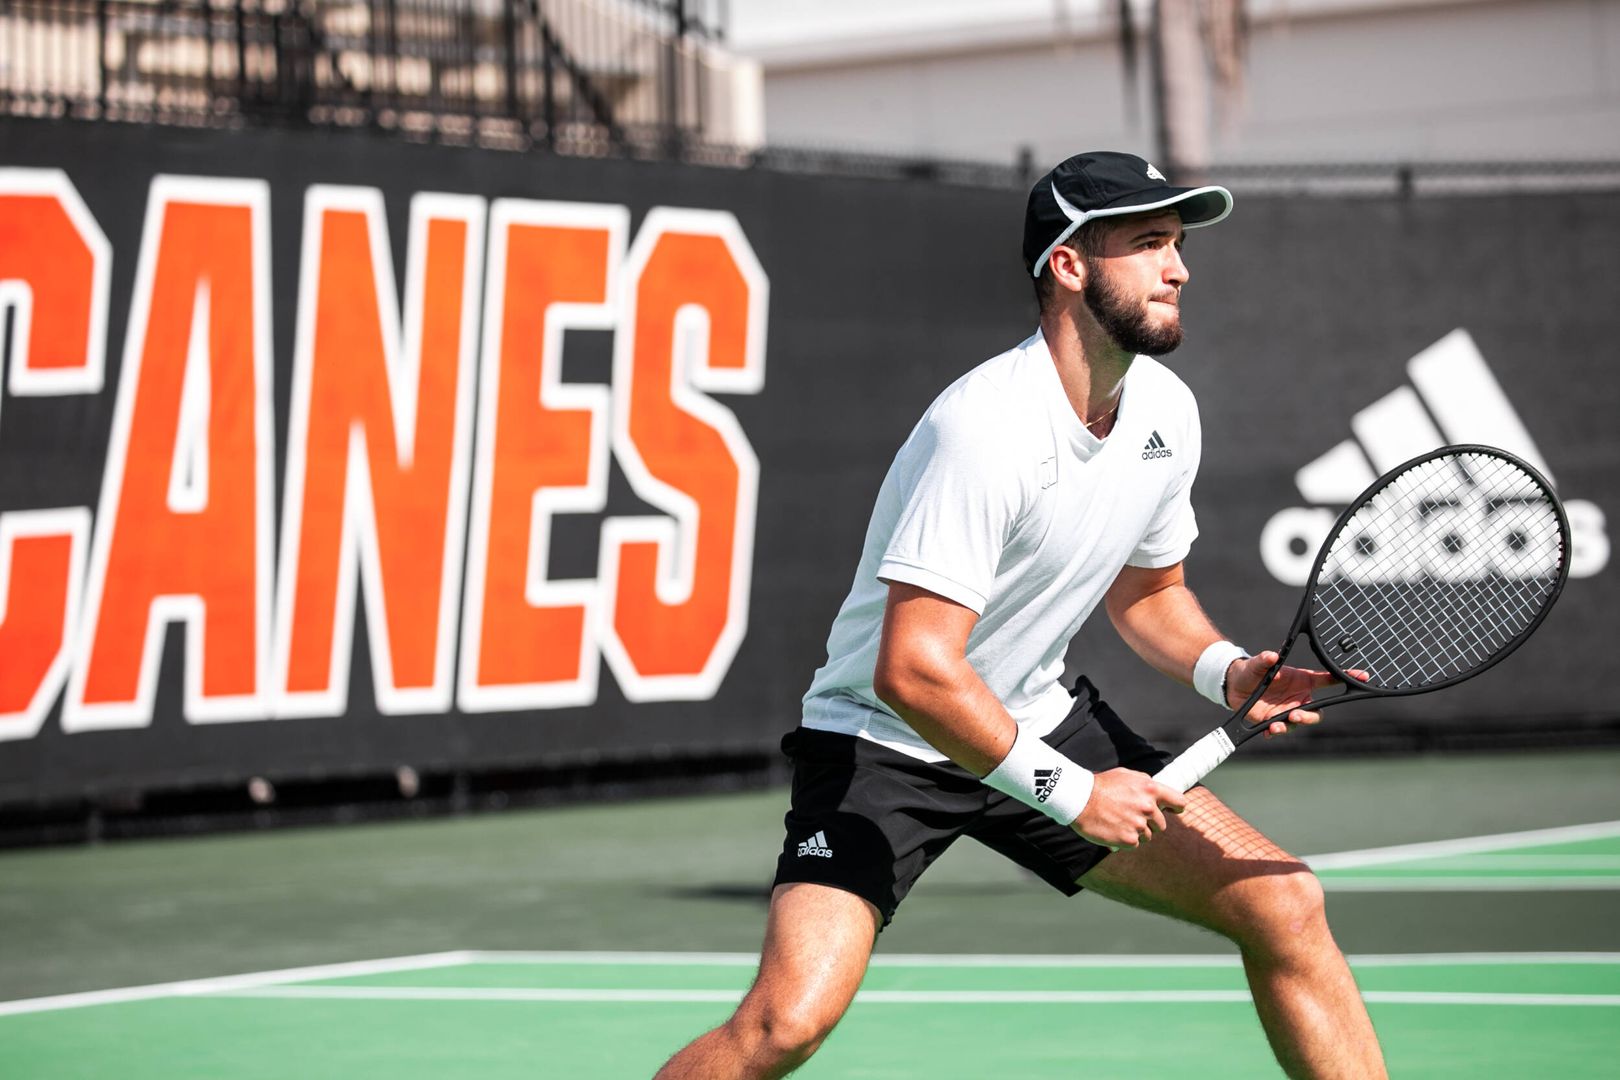 Canes Ranked on ITA Singles and Doubles List